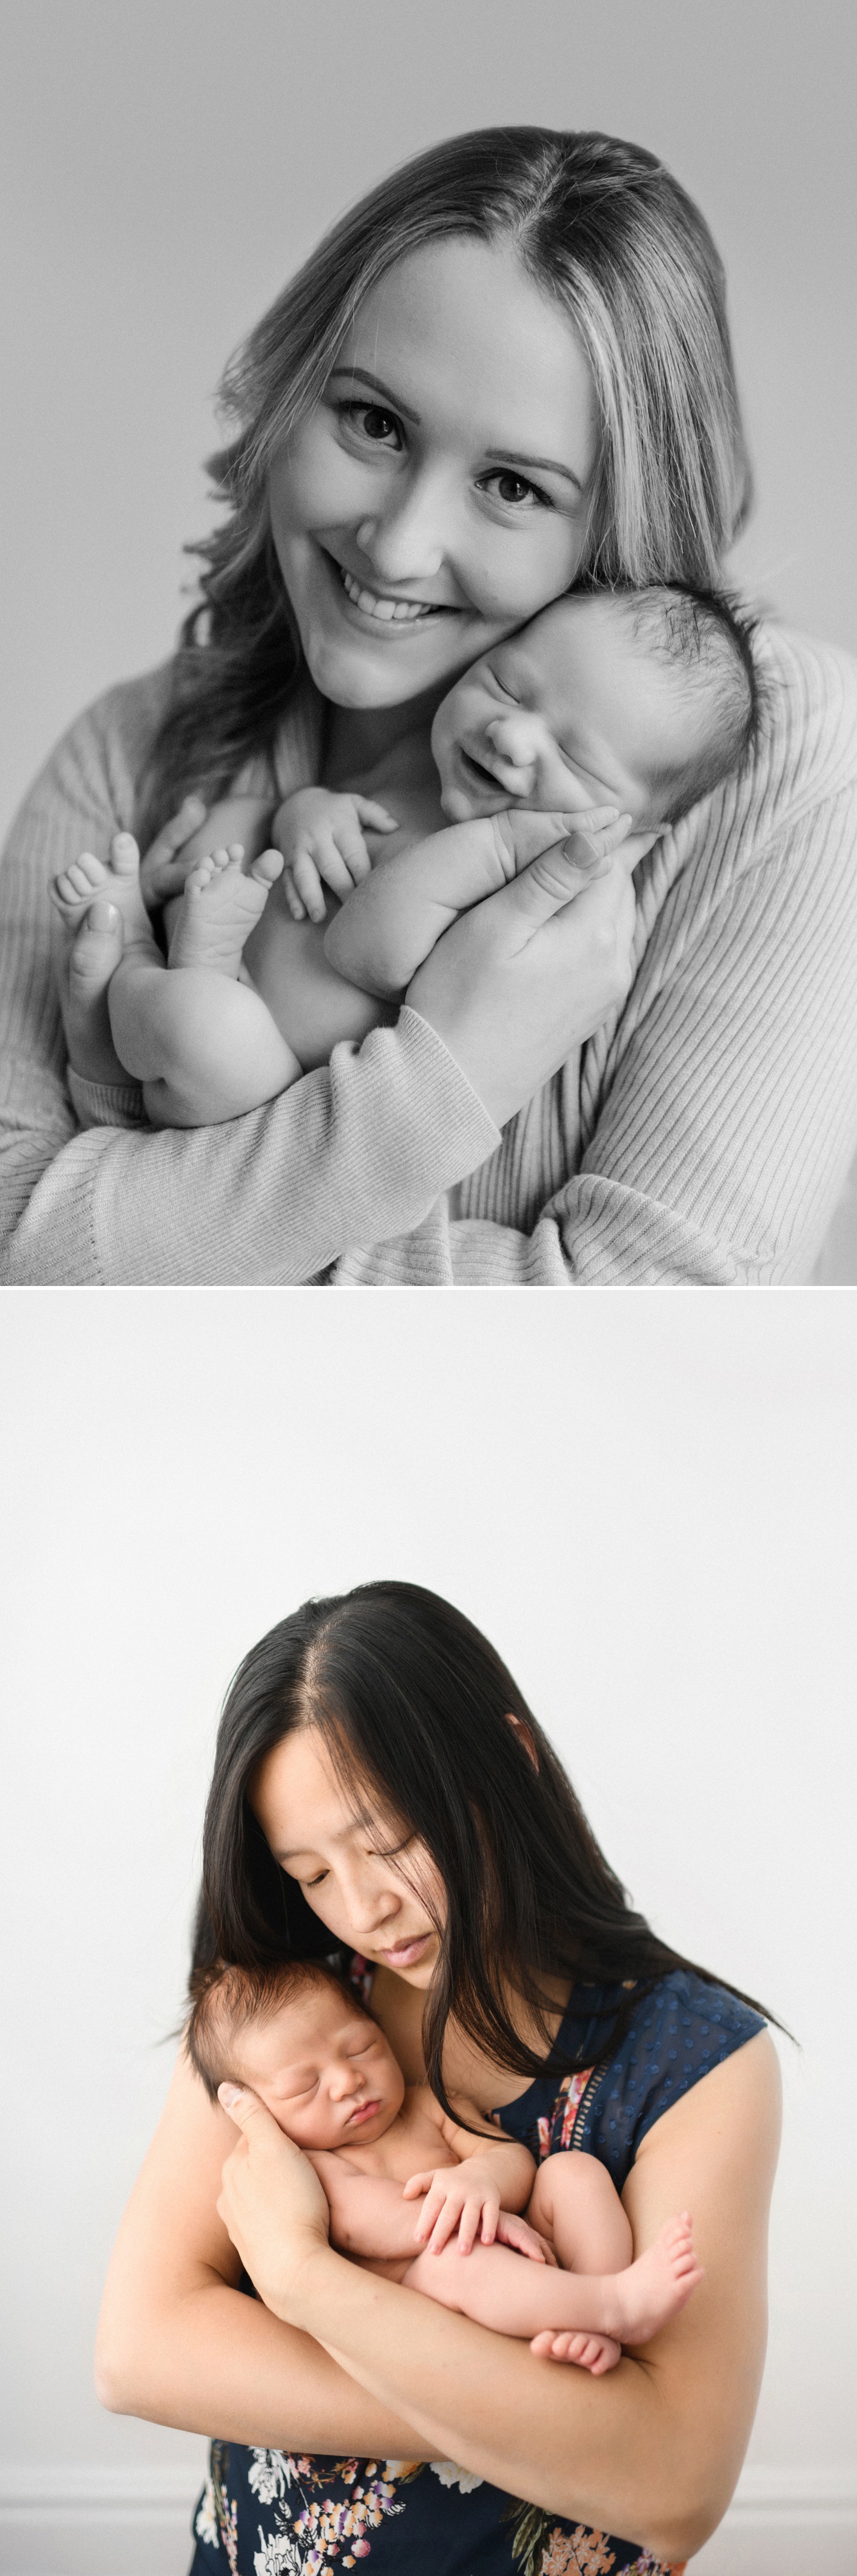 Posing Tips for Mom so she looks her best during the newborn session